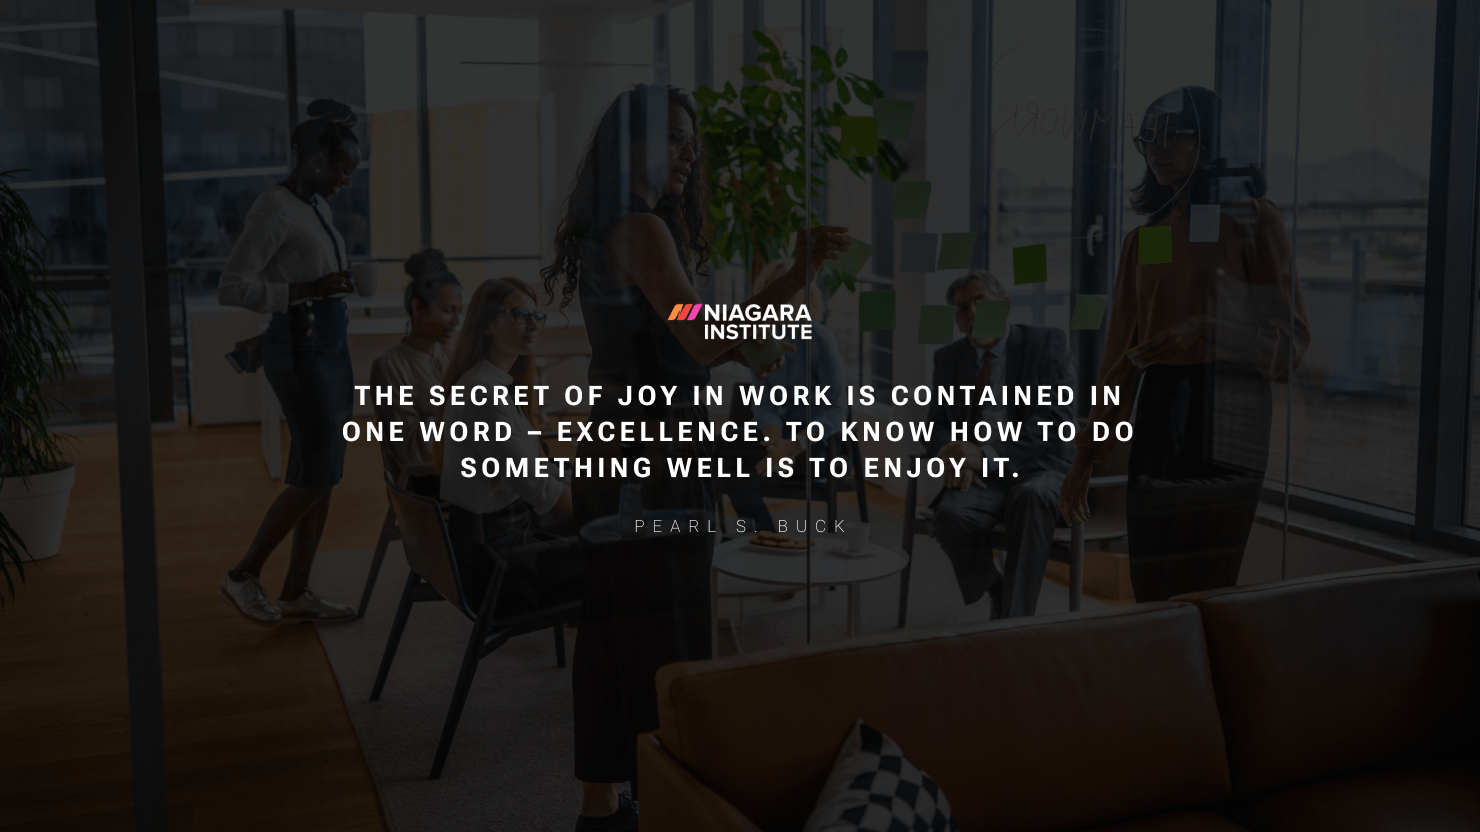 The secret of joy in work is contained in one word – excellence. To know how to do something well is to enjoy it